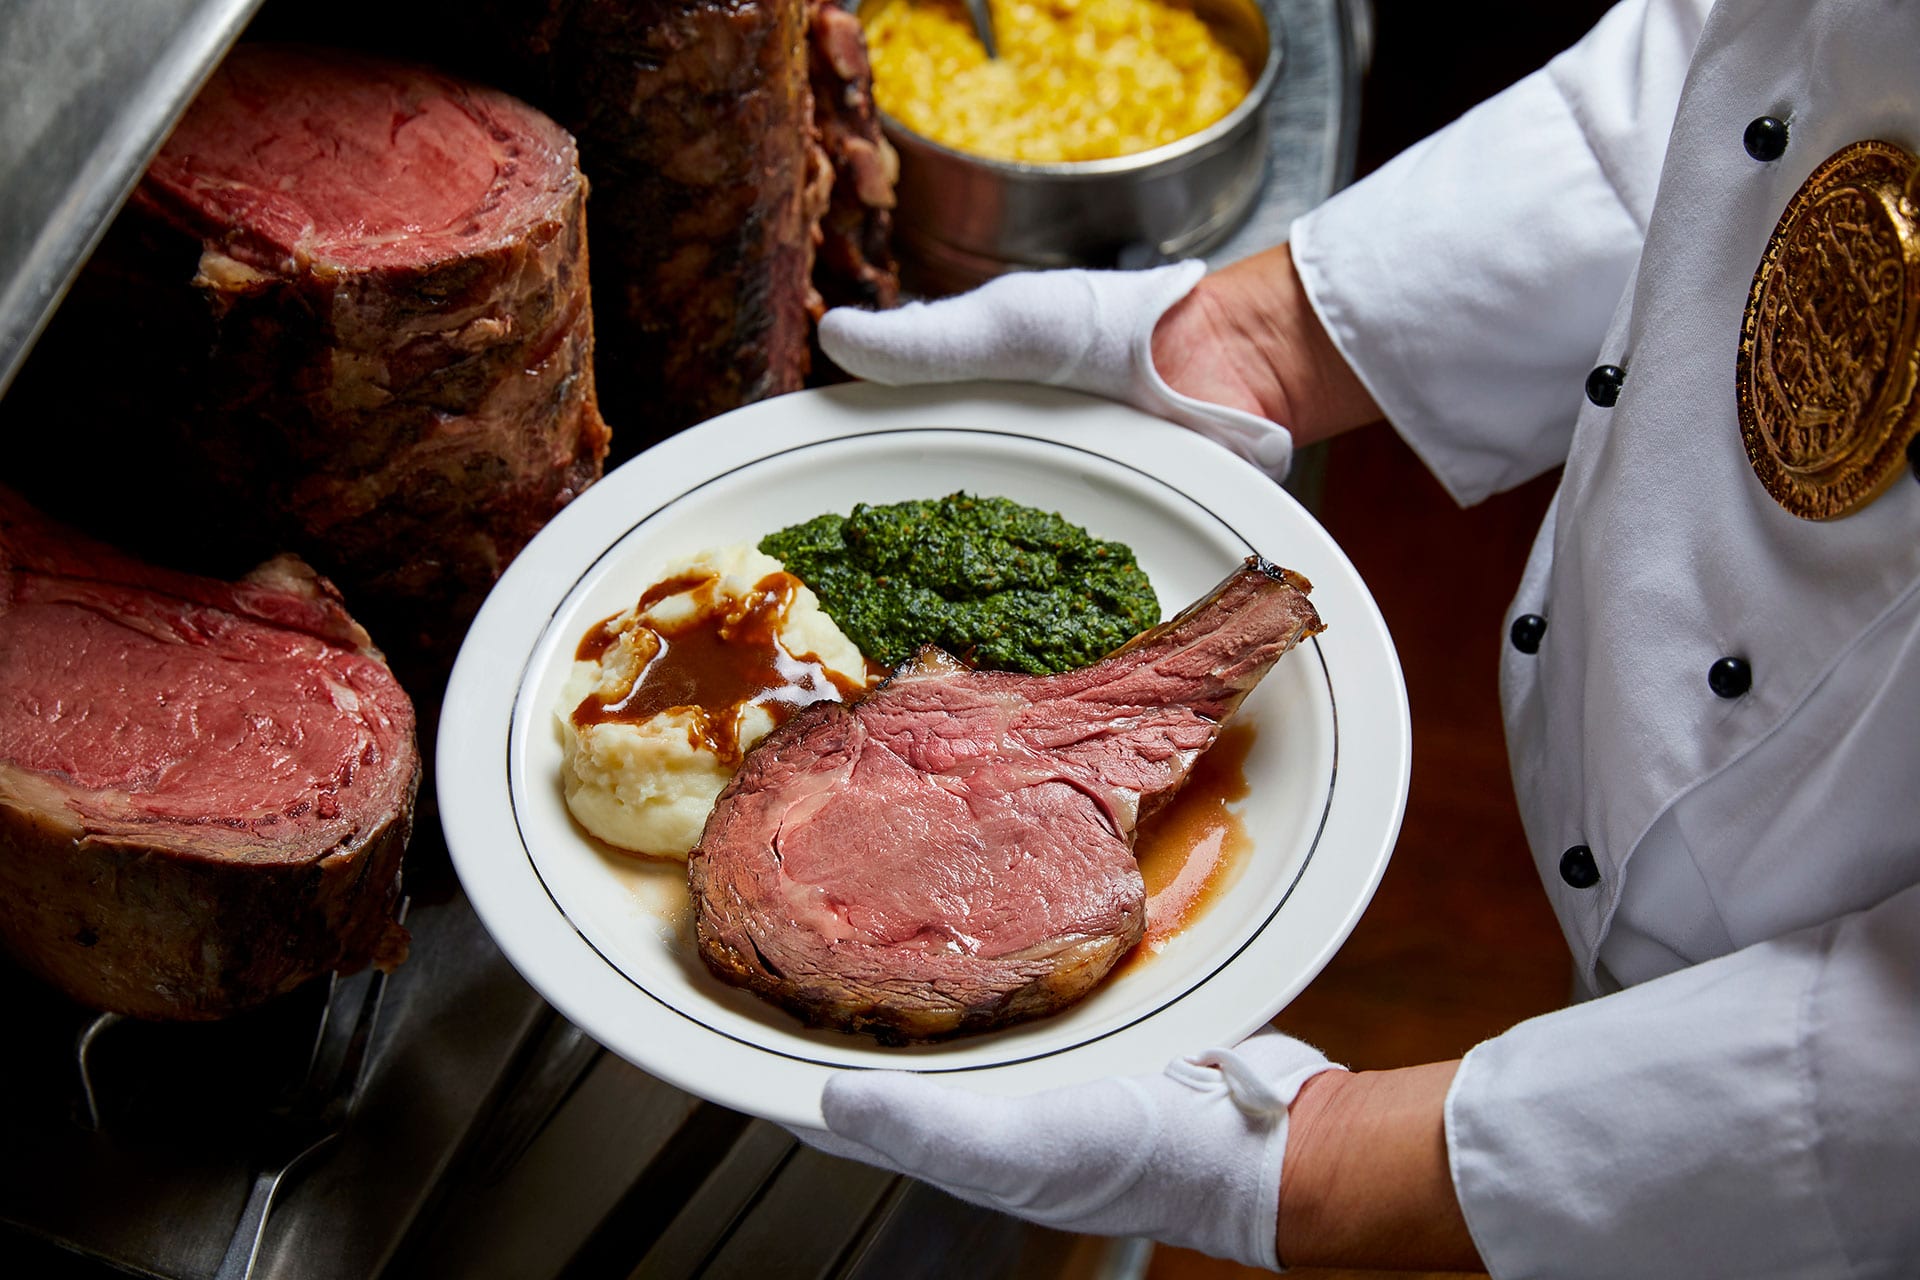 A chef in a white jacket and white gloves holds a plate of sliced prime rib, mashed potatoes, and green vegetables.